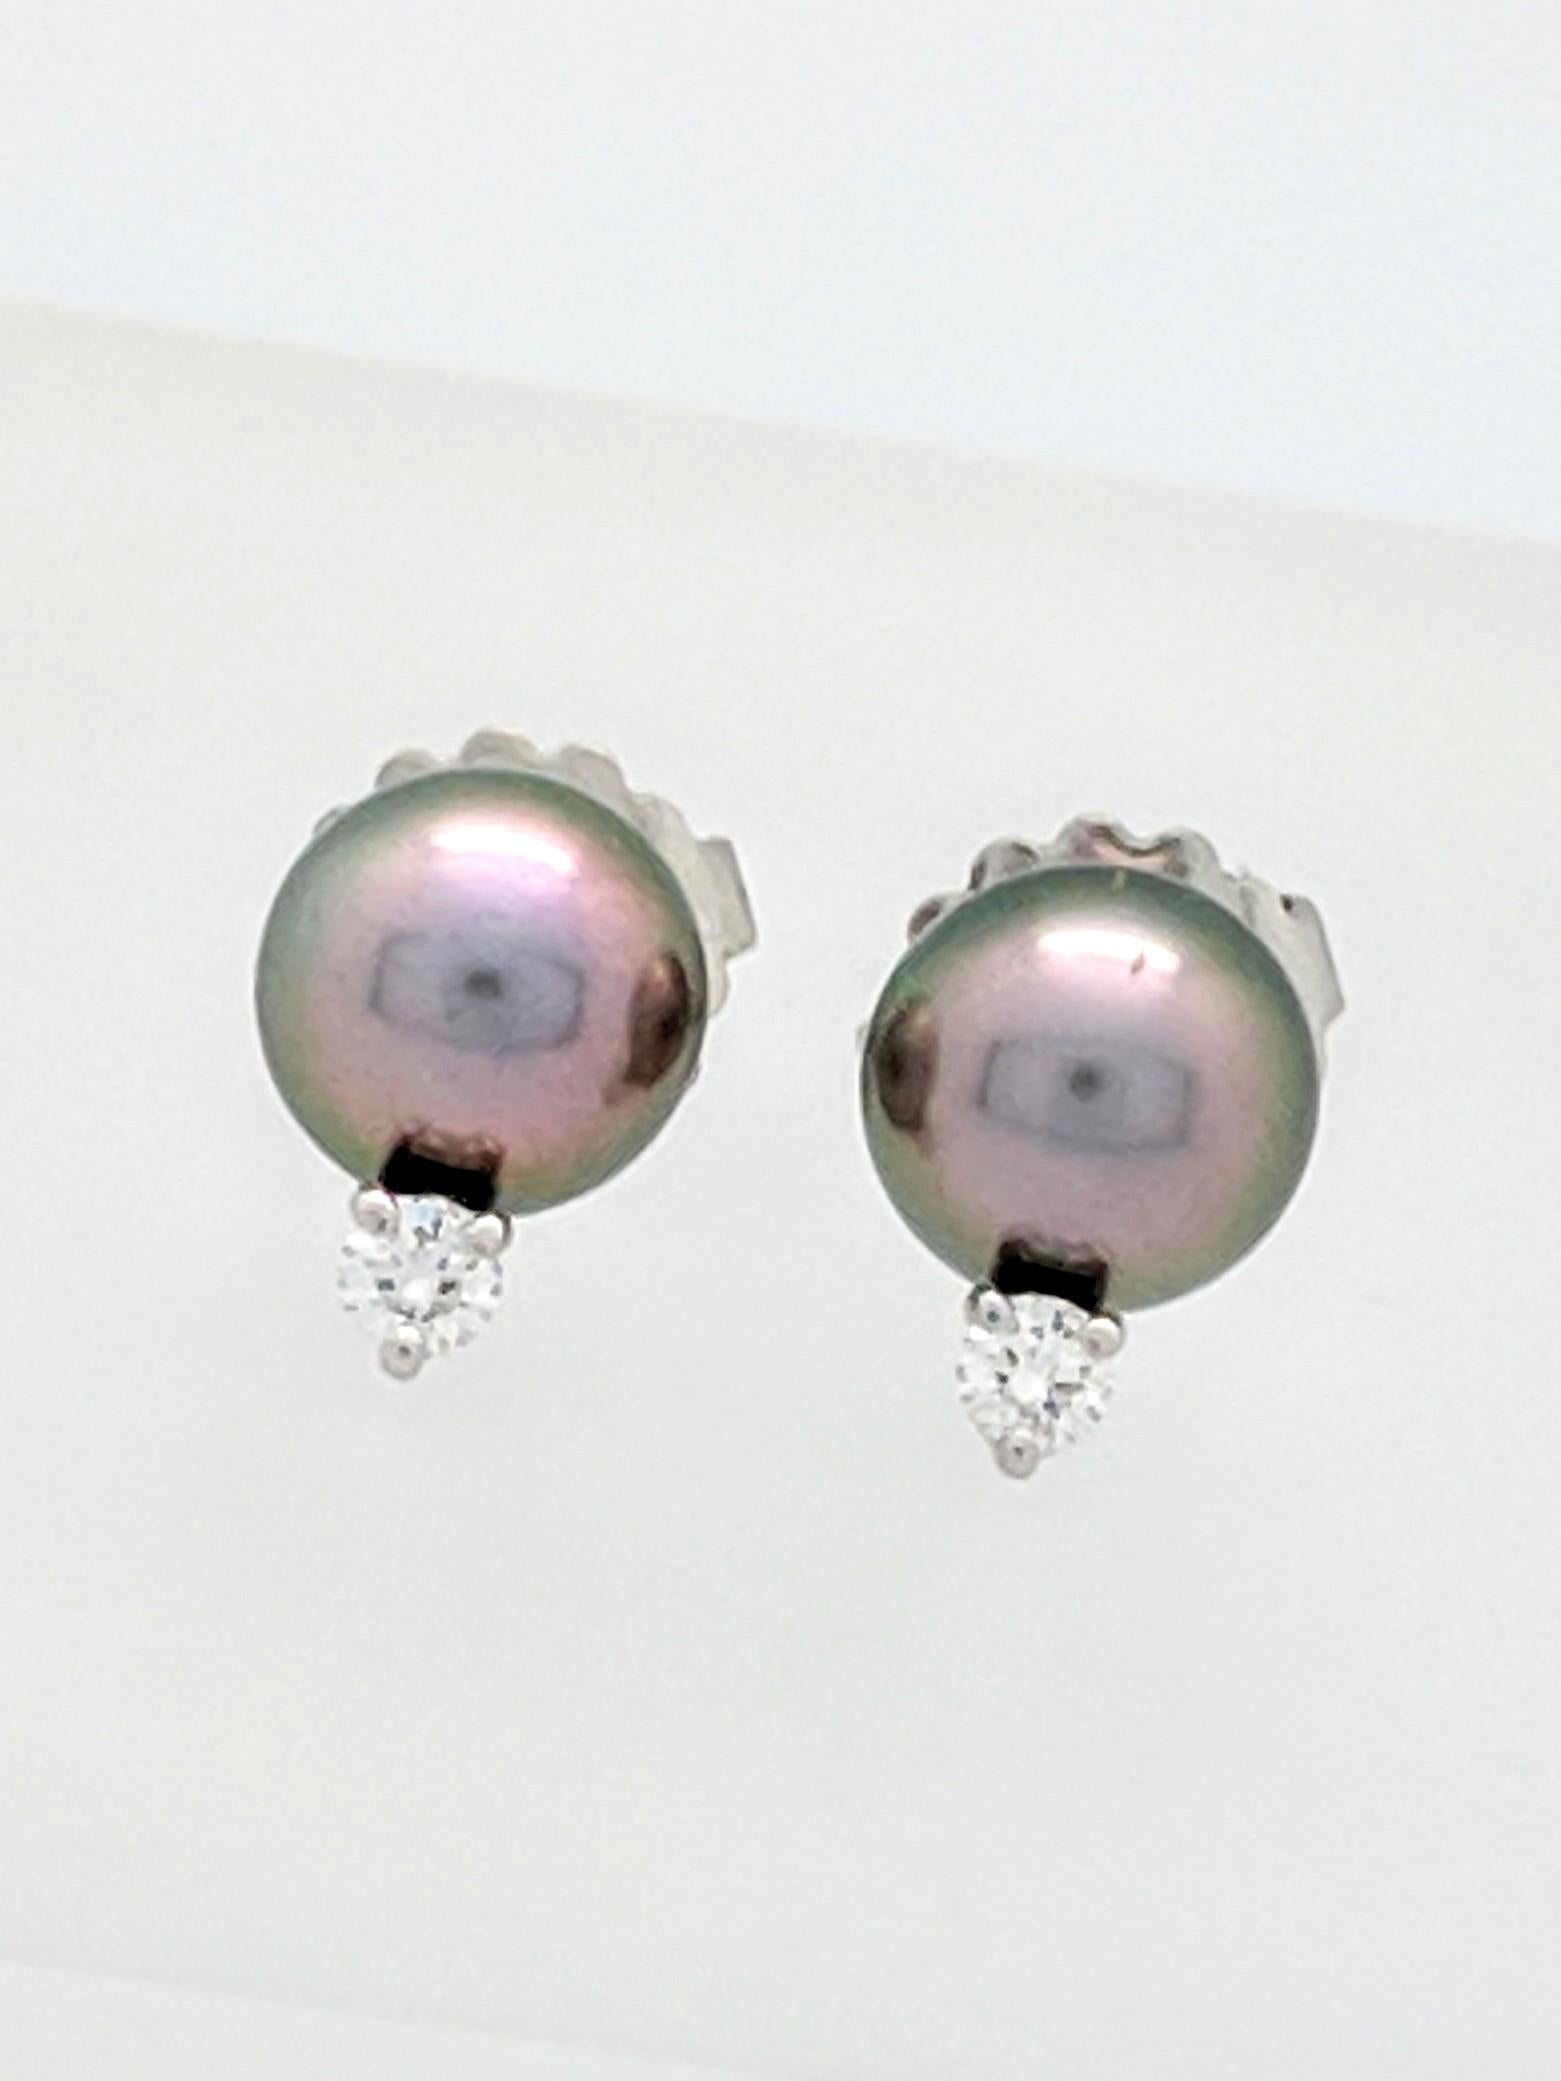 You are viewing a Stunning Pair of Mikimoto Black South Sea Stud Earrings with Diamonds. 

Each earring features (1) 9mm black south sea cultured pearl with .10ct diamond, set in 18k white gold. 

Retail $2730

These earrings come to you in